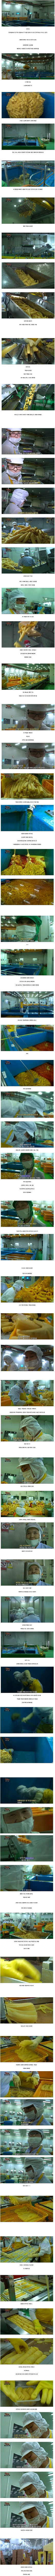 The average annual salary of 35 million won for a pickled radish factory.